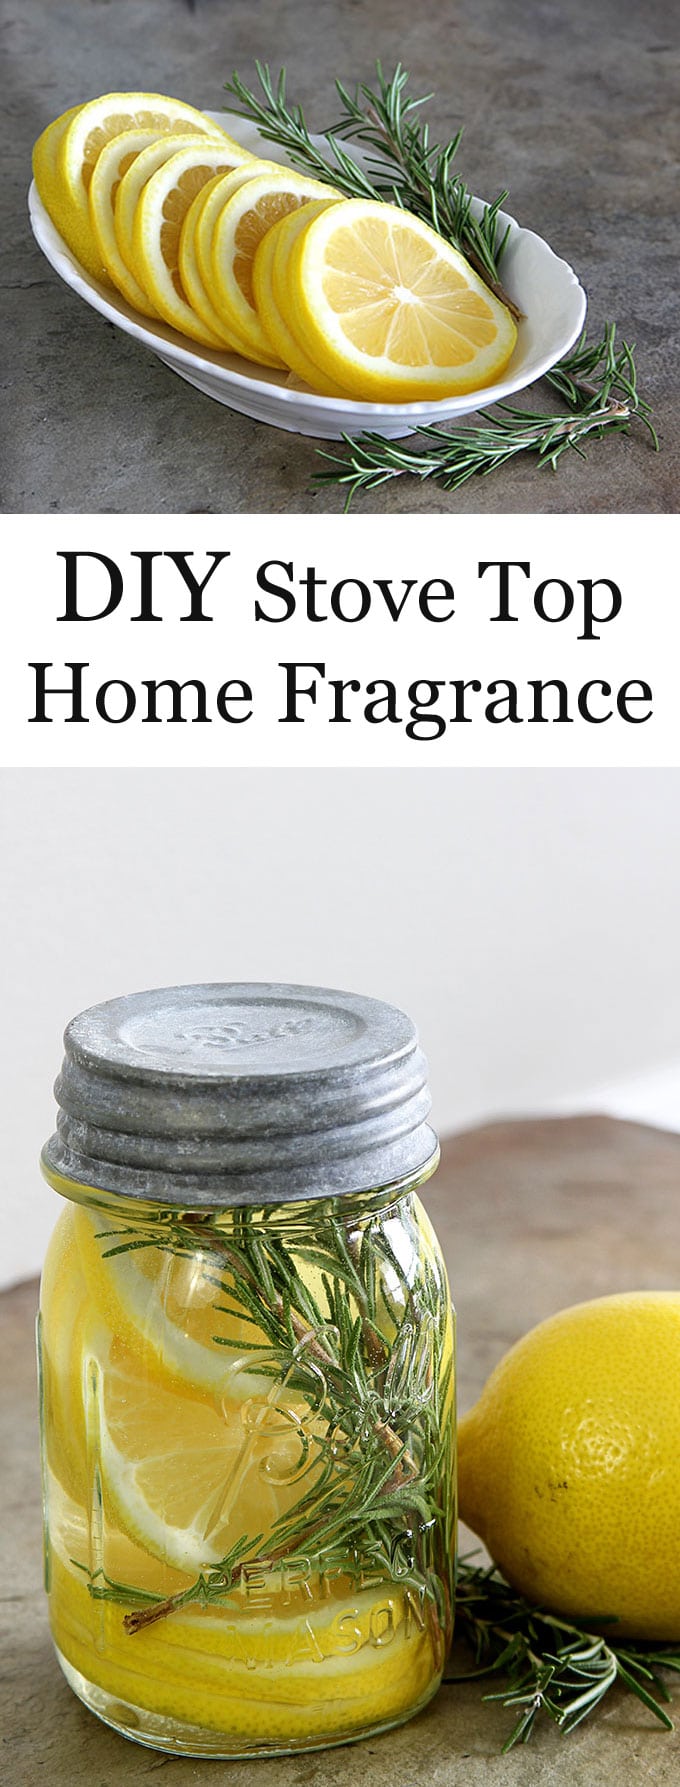 Learn how to make a DIY Stove Top Home Fragrance with just a few ingredients. A quick and easy potpourri recipe to make your home smell fresh and cozy! #homefragrances #roomscent #diyproject #diy #allnatural #potpourri 